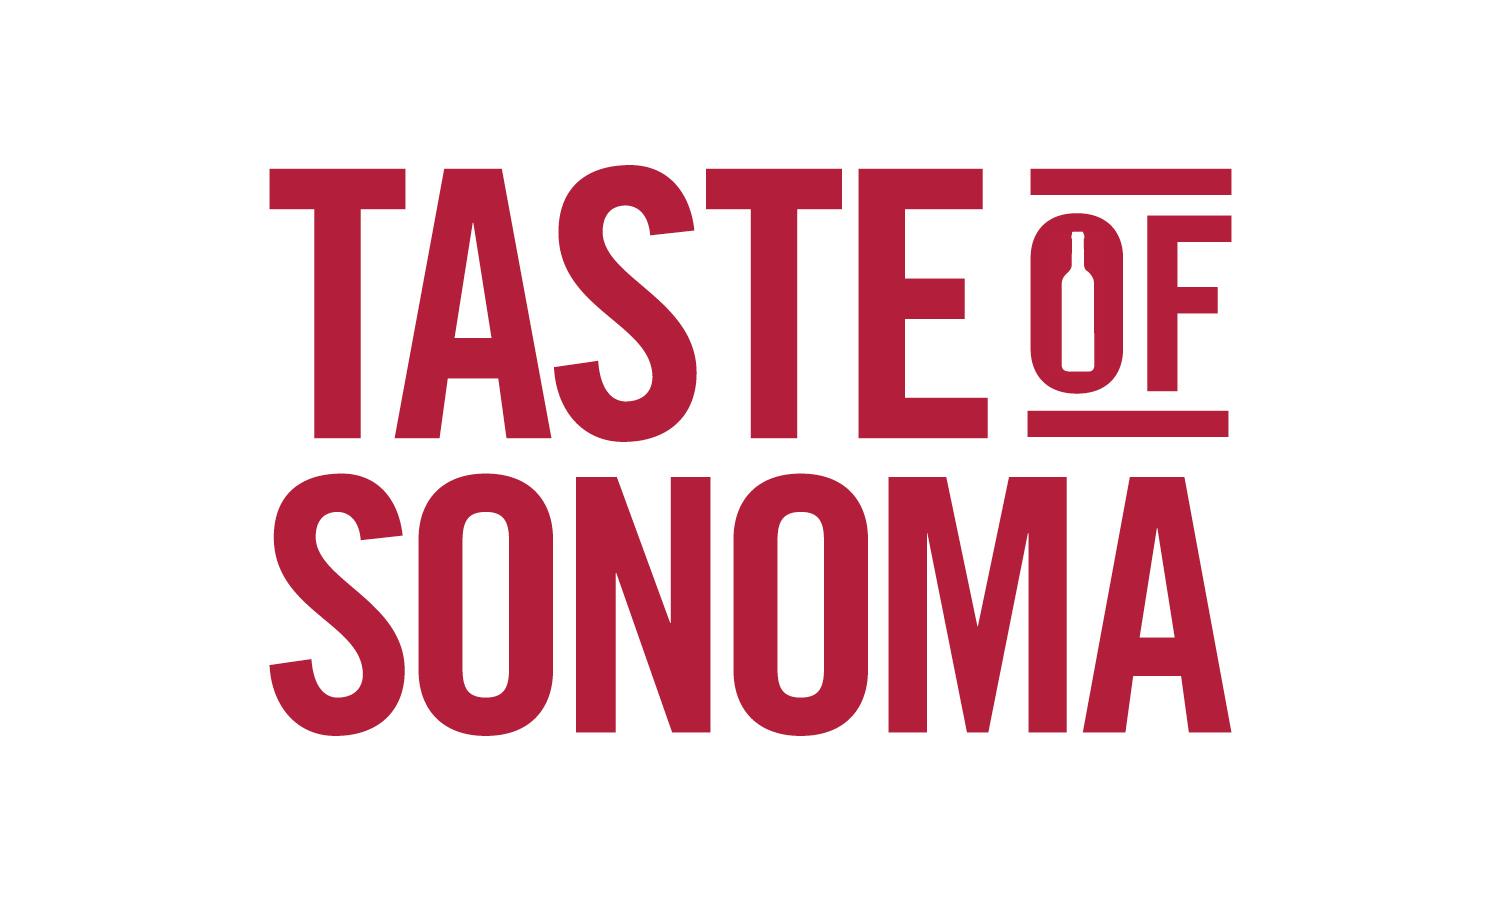 Sonoma Logo - Taste of Sonoma Logos and Banner Images - Sonoma Wine Country Weekend